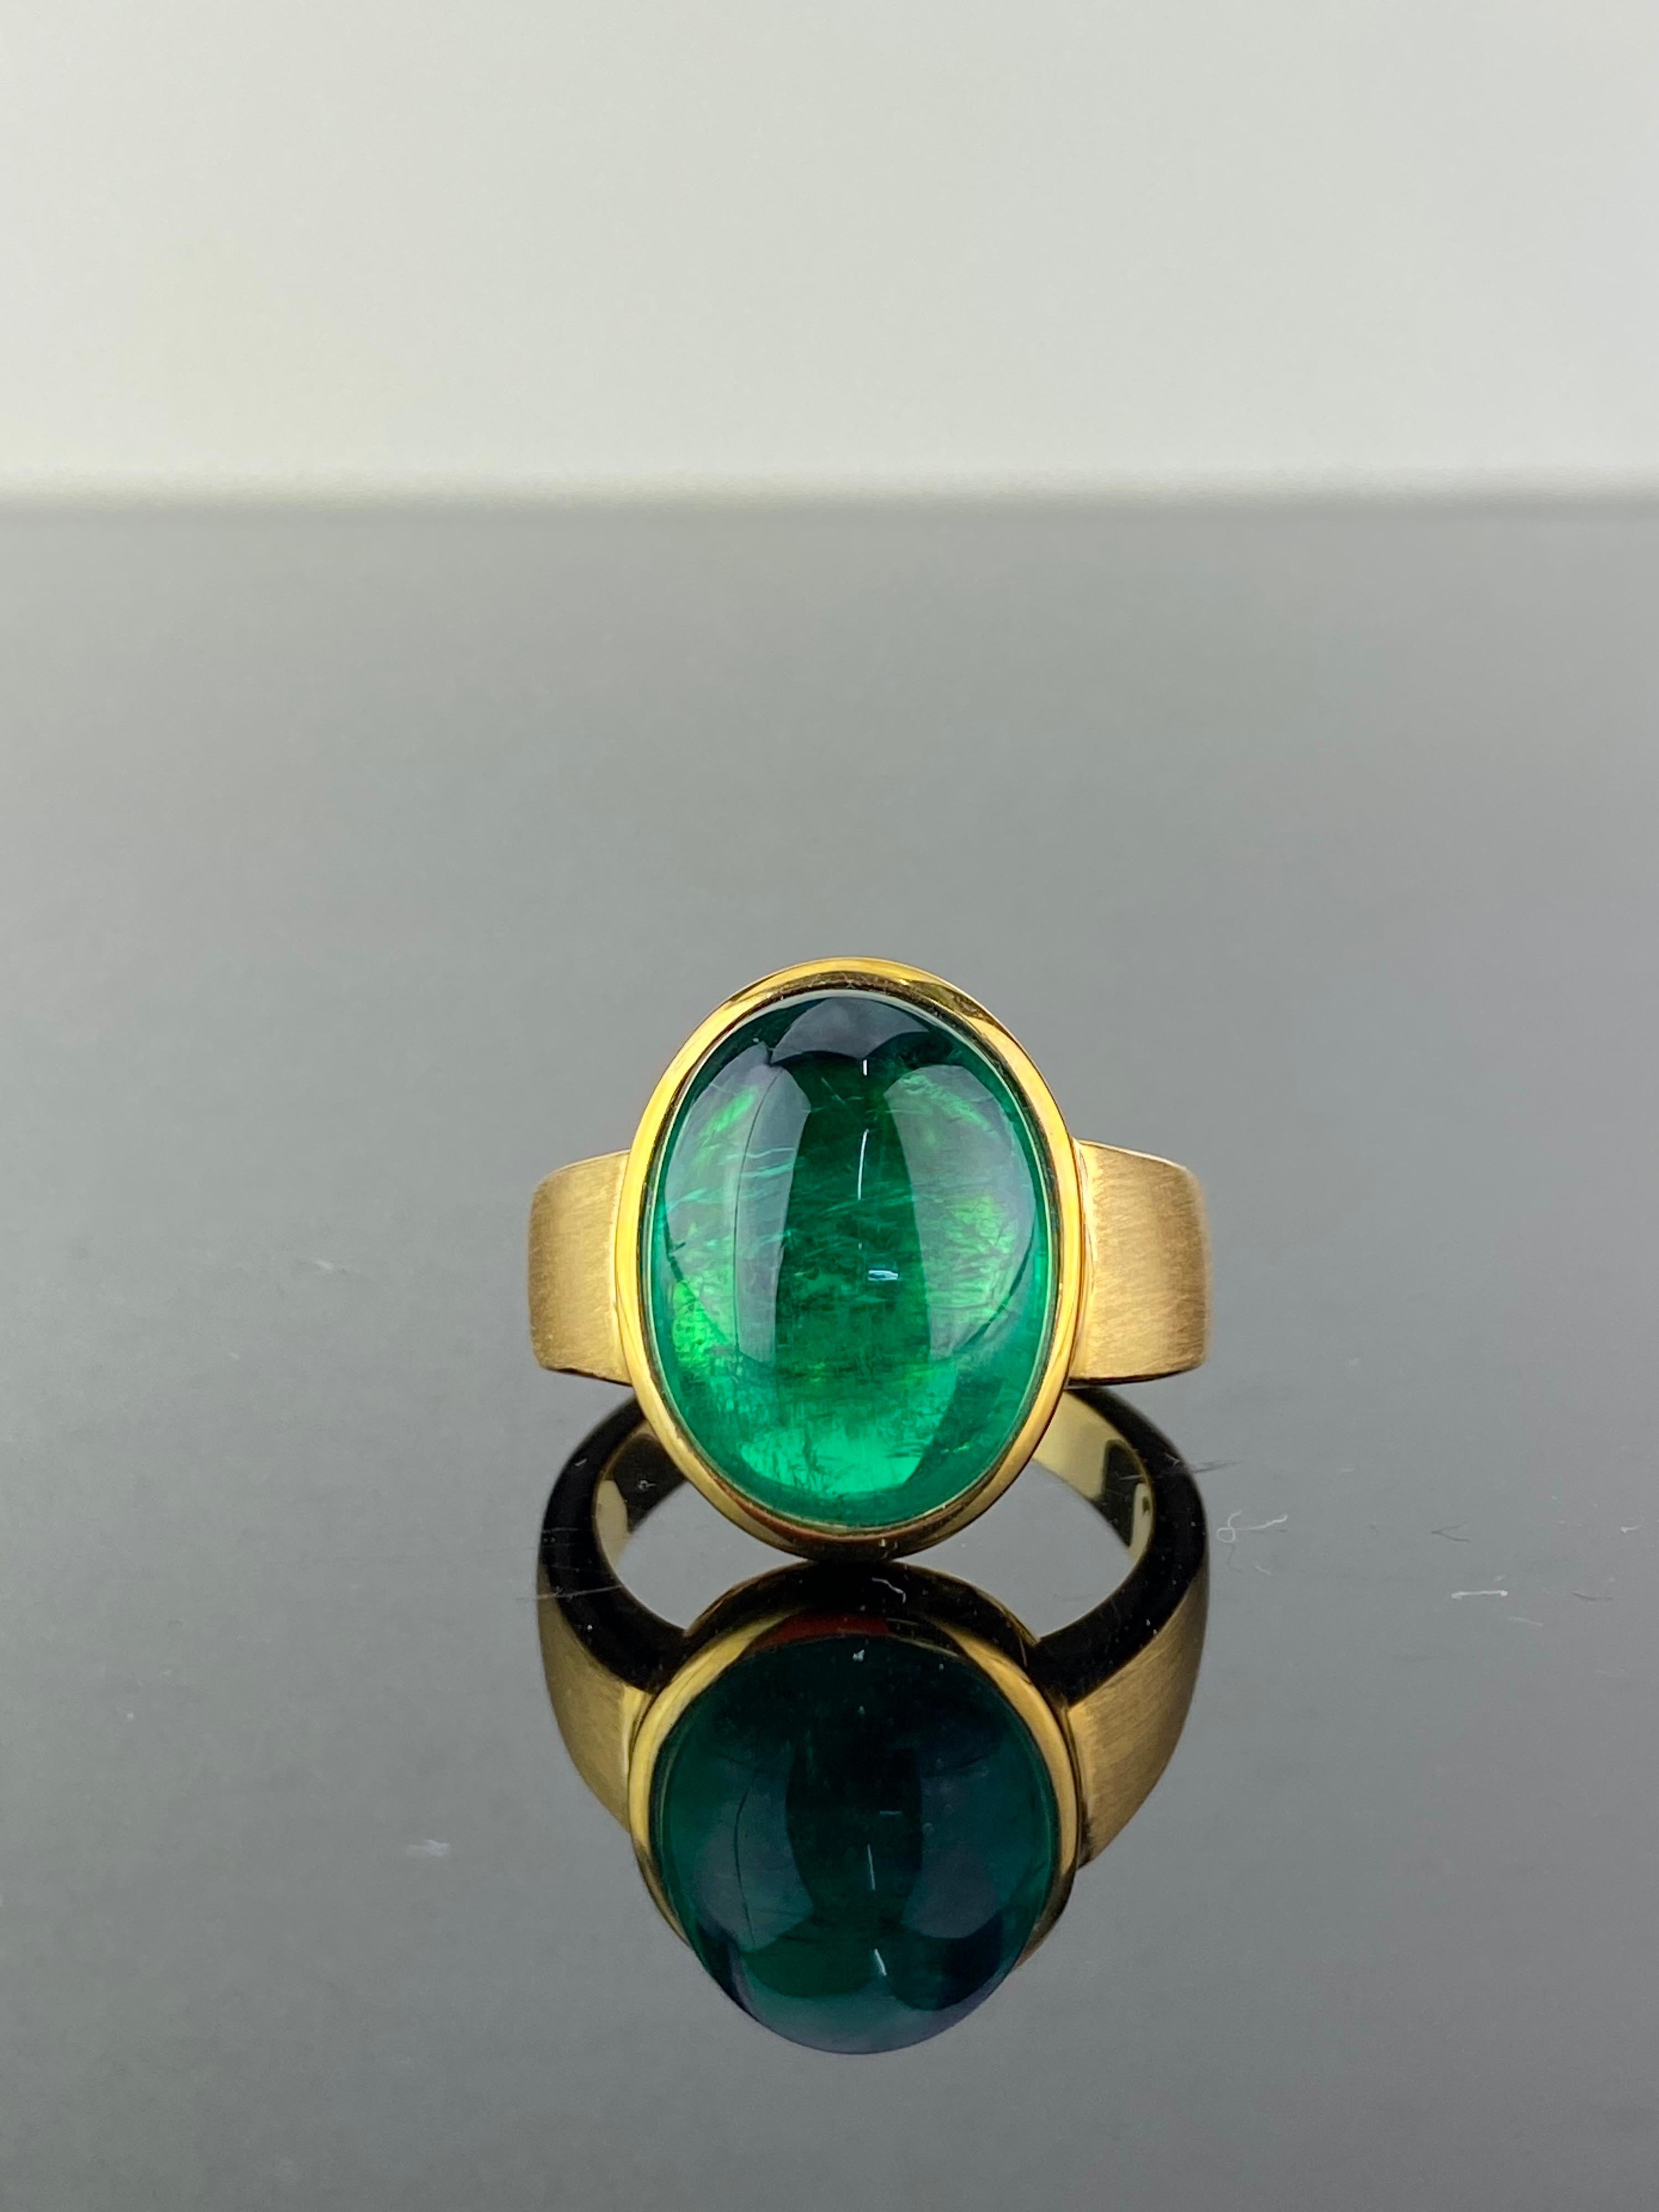 An absolutely stunning 10.87 carat Zambian Emerald cabochon and matte finish 18K Yellow Gold ring. The natural Emerald centre stone is completely transparent with an ideal vivid green color and is of a very high quality, and the matte finish gold